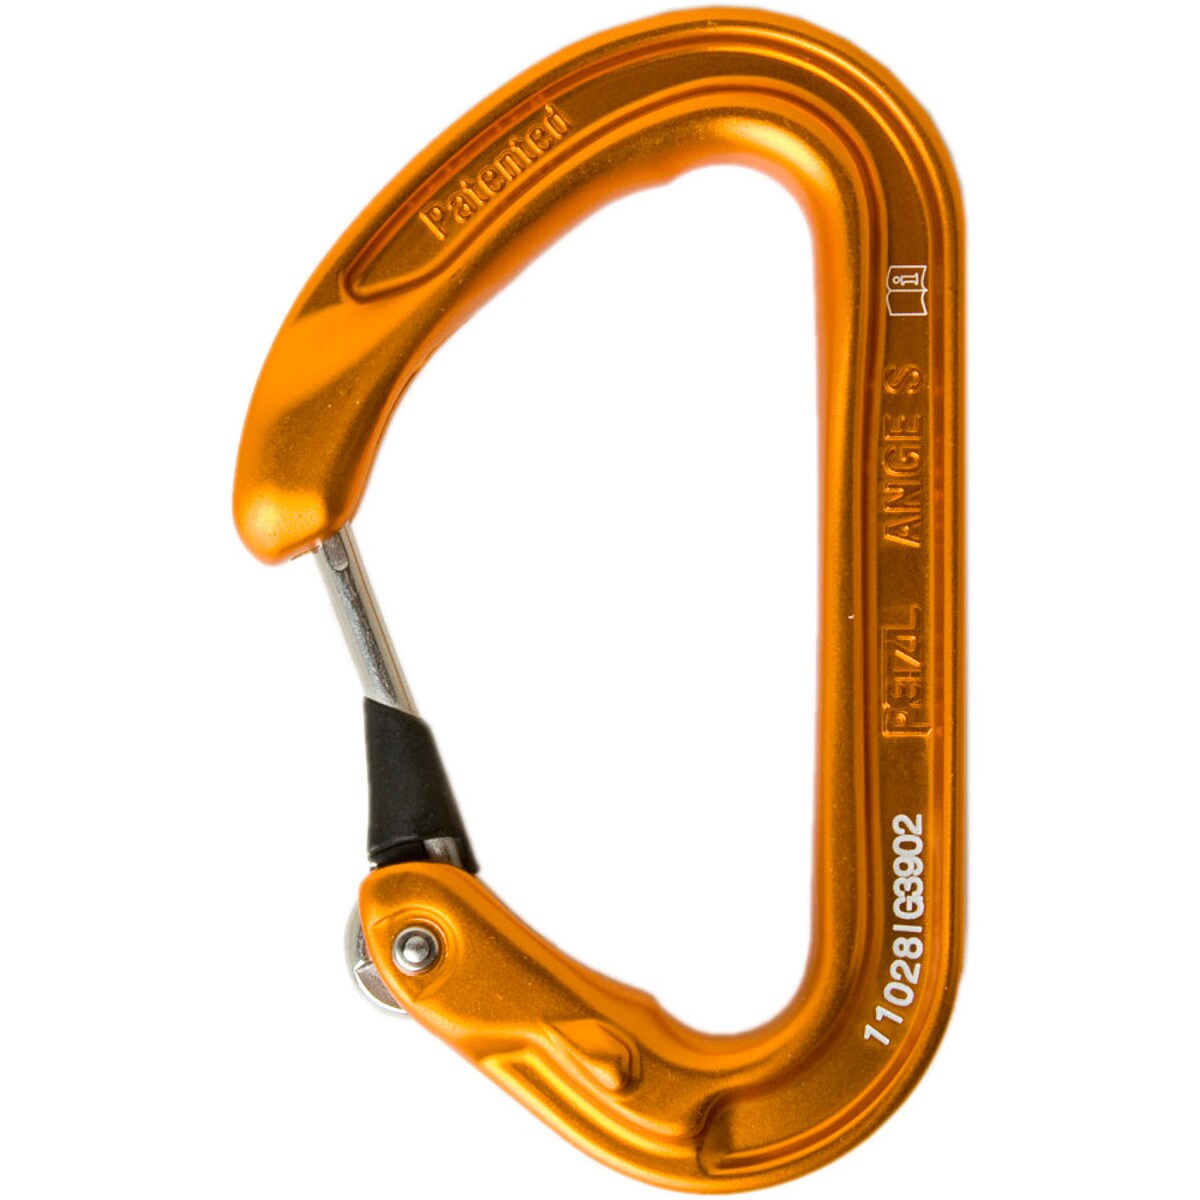 Petzl Ange S Wire Gate Carabiner